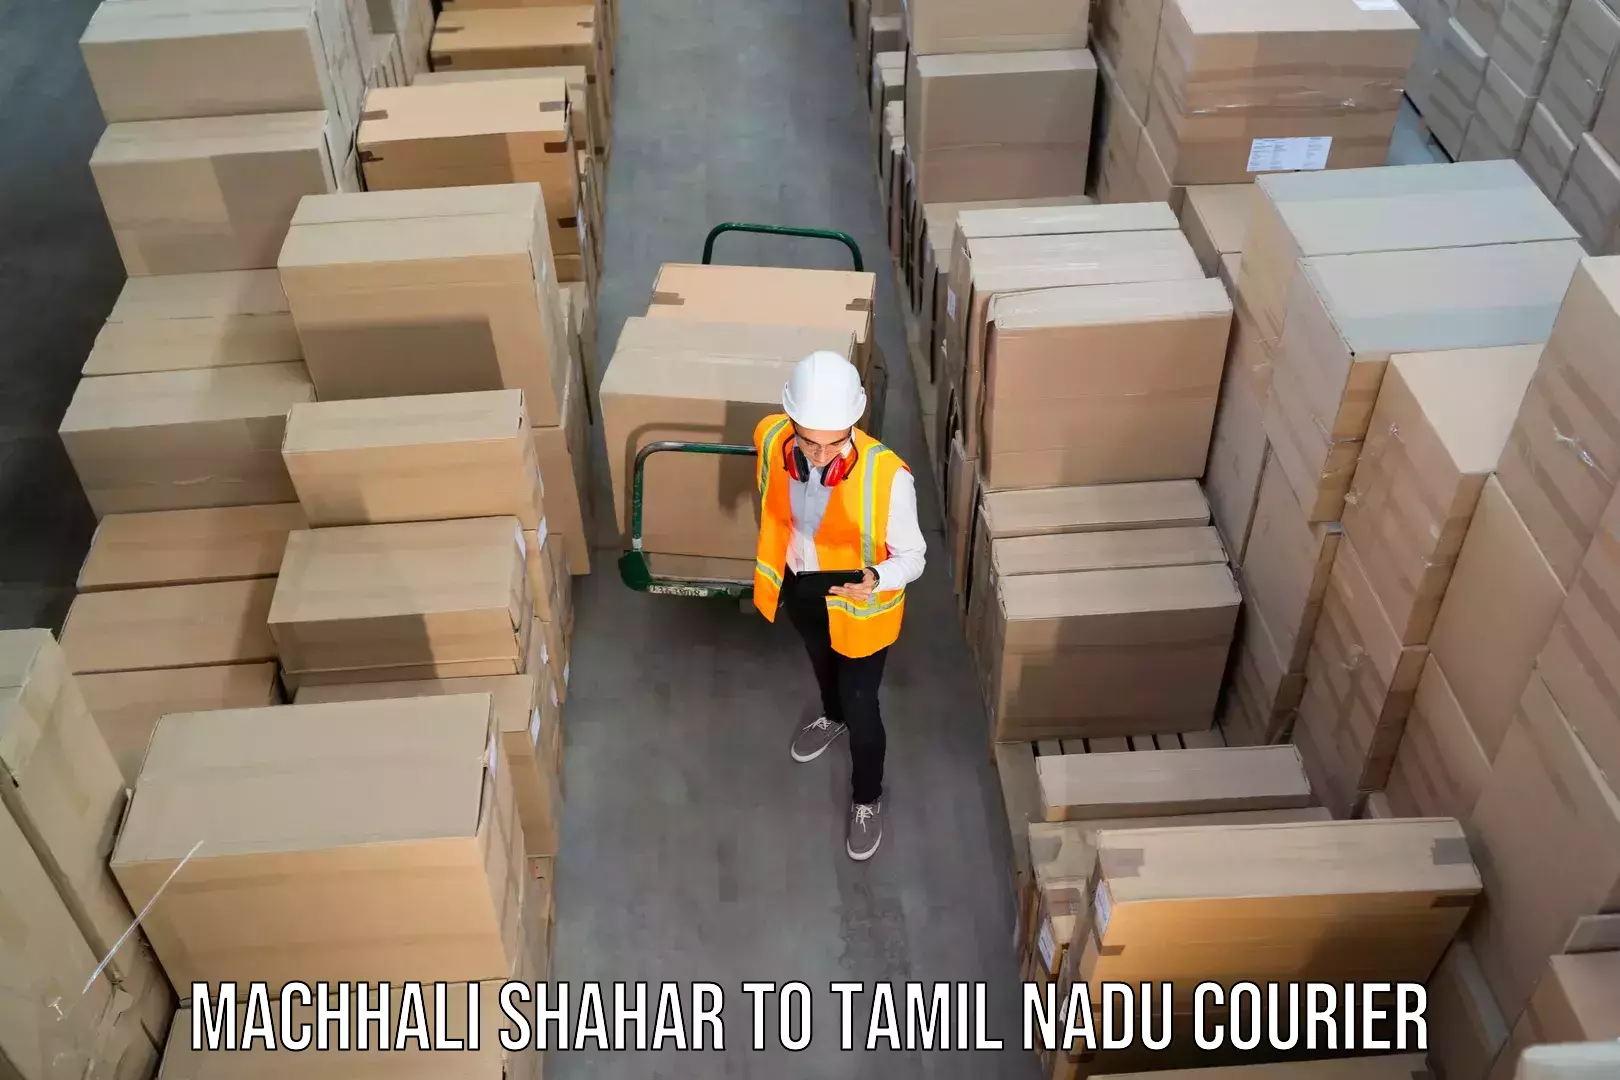 Sustainable shipping practices Machhali Shahar to Tamil Nadu